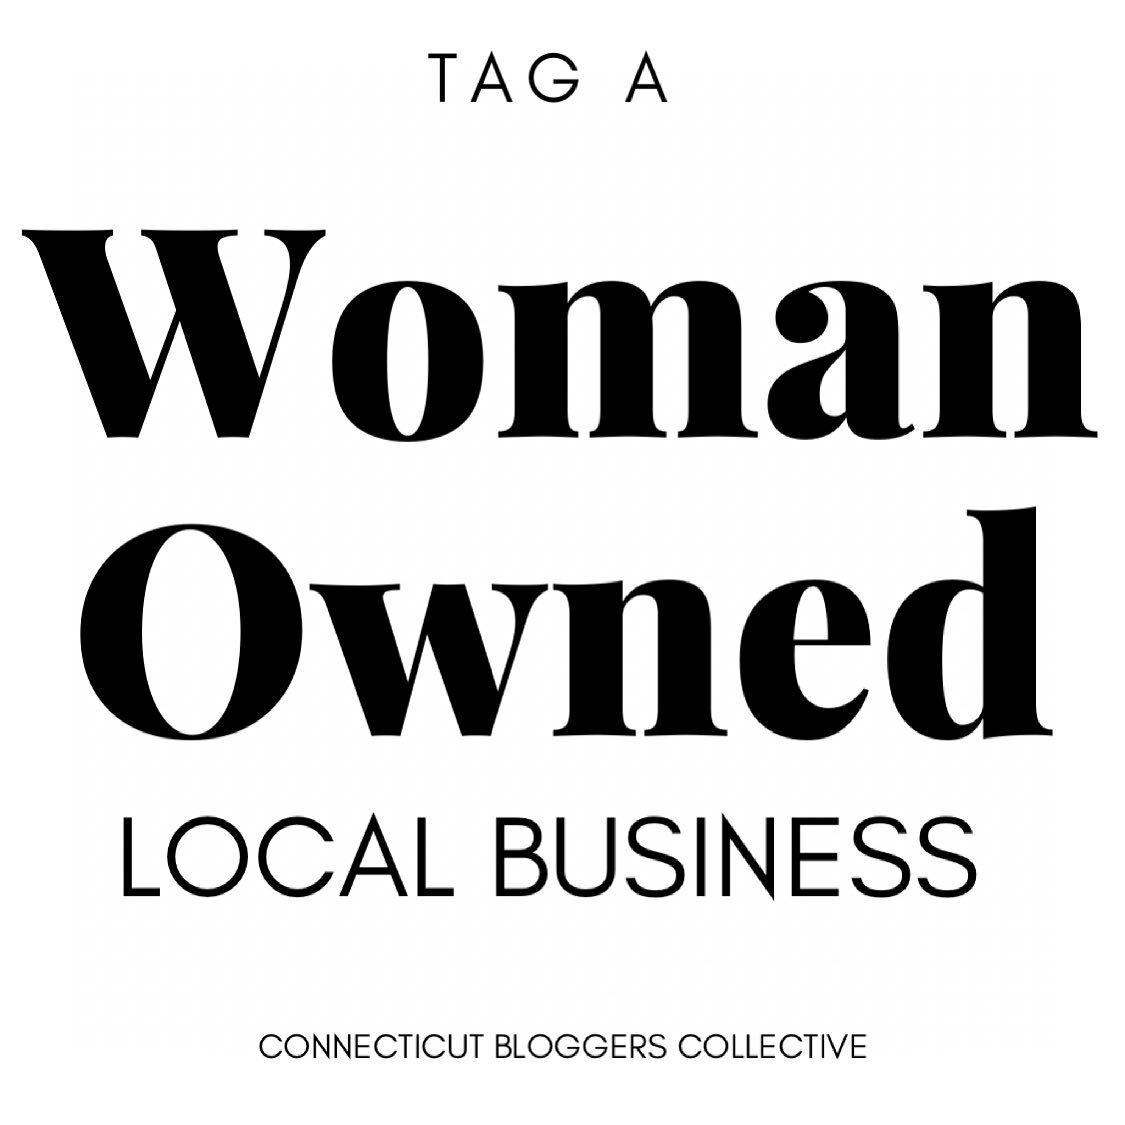 Tag a WOMAN OWNED local business &mdash; In celebration of international women&rsquo;s month, we want to highlight women owned businesses! 

#shoplocalct #ctshopsmall #smallbusinessct #ctblogger #ctbloggerbabes